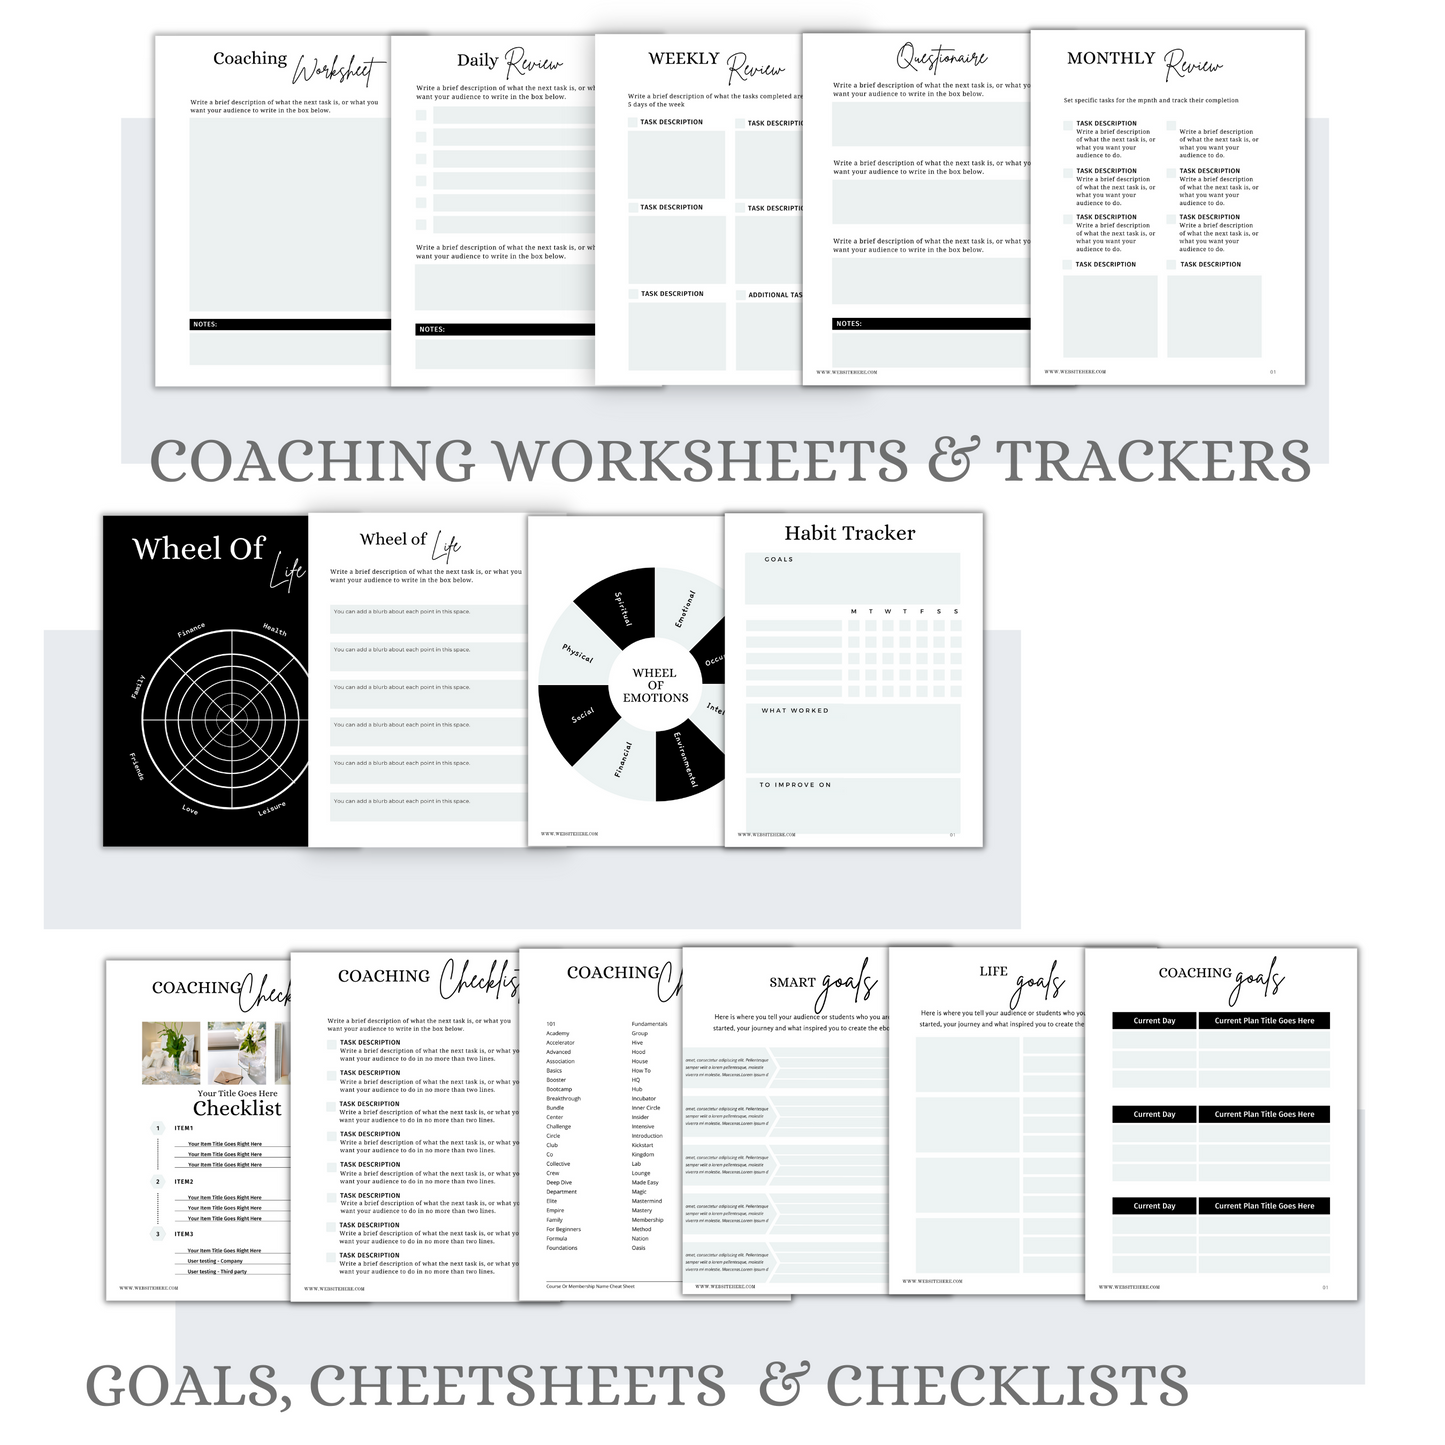 85+ Coaching Client Welcome Packet Template Canva